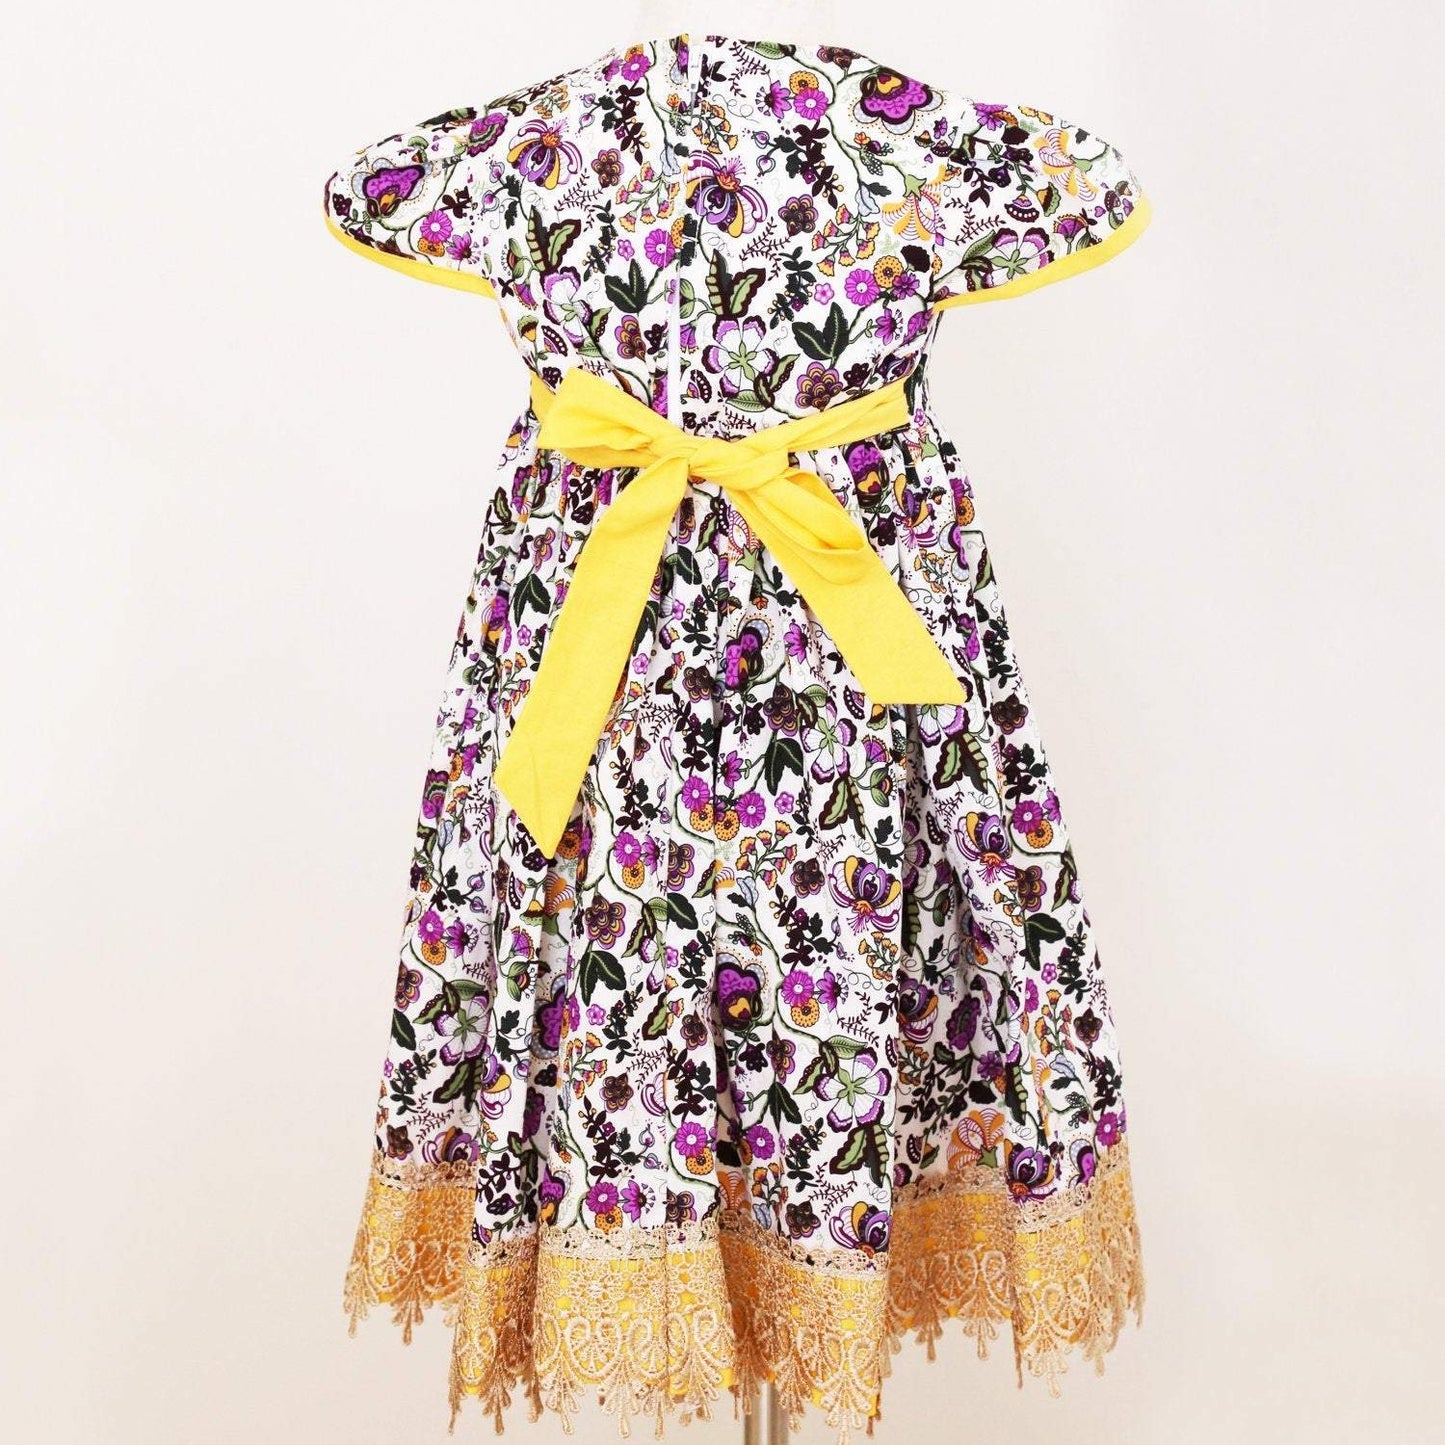 Dress - Exquisite Collection - Purple flowers, Yellow Bias Binding on Sleeve and Gold Lace Hemline